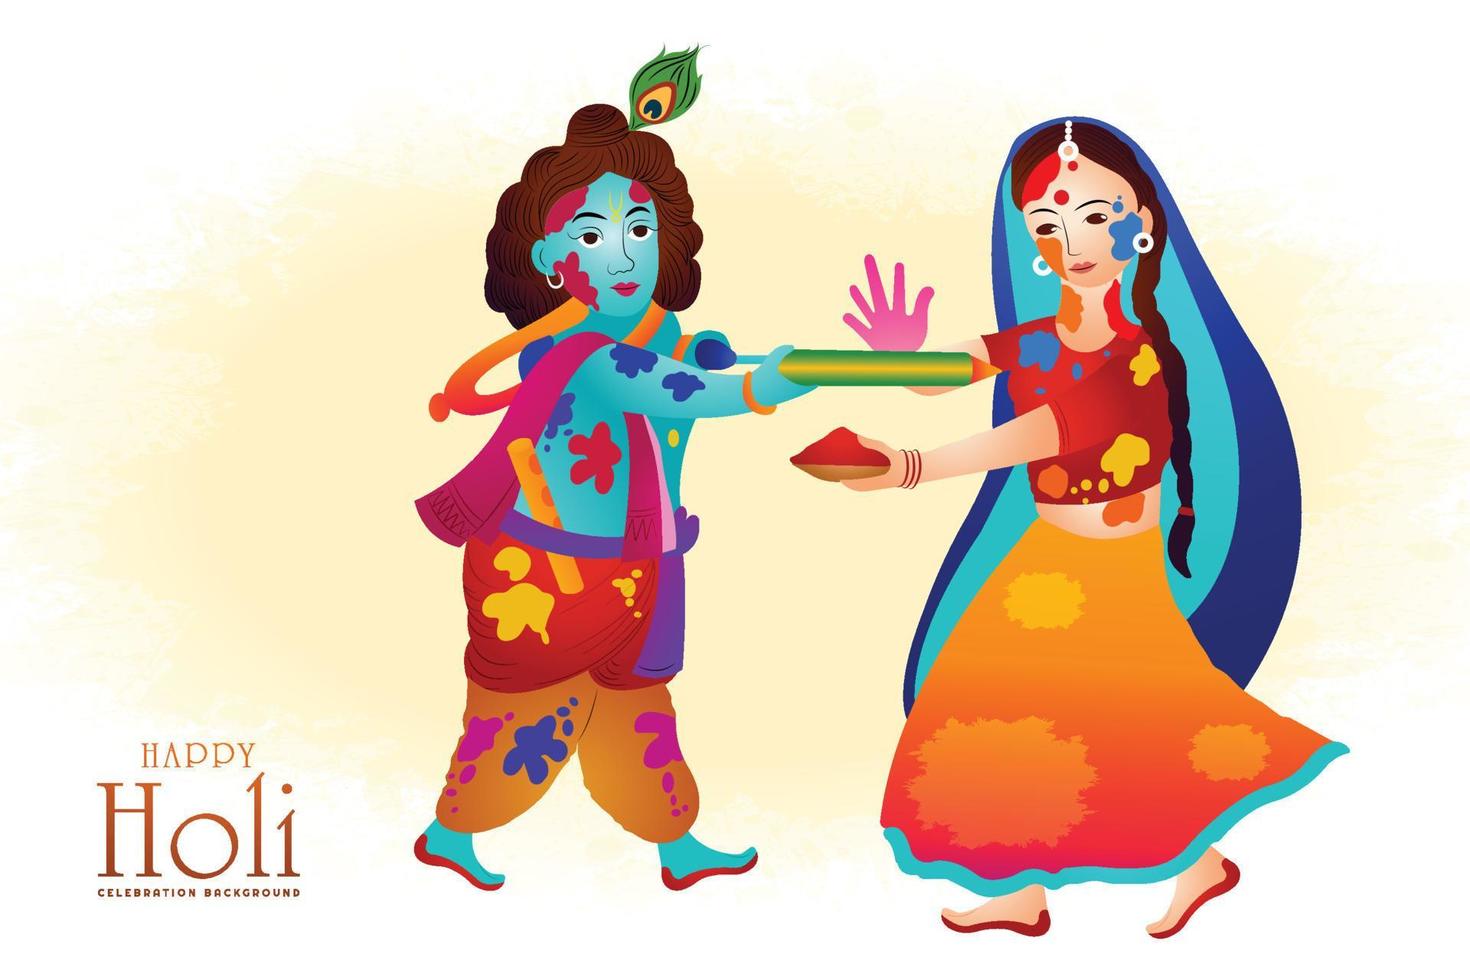 Holi greetings with joyful krishna and radha playing with colors illustration background vector